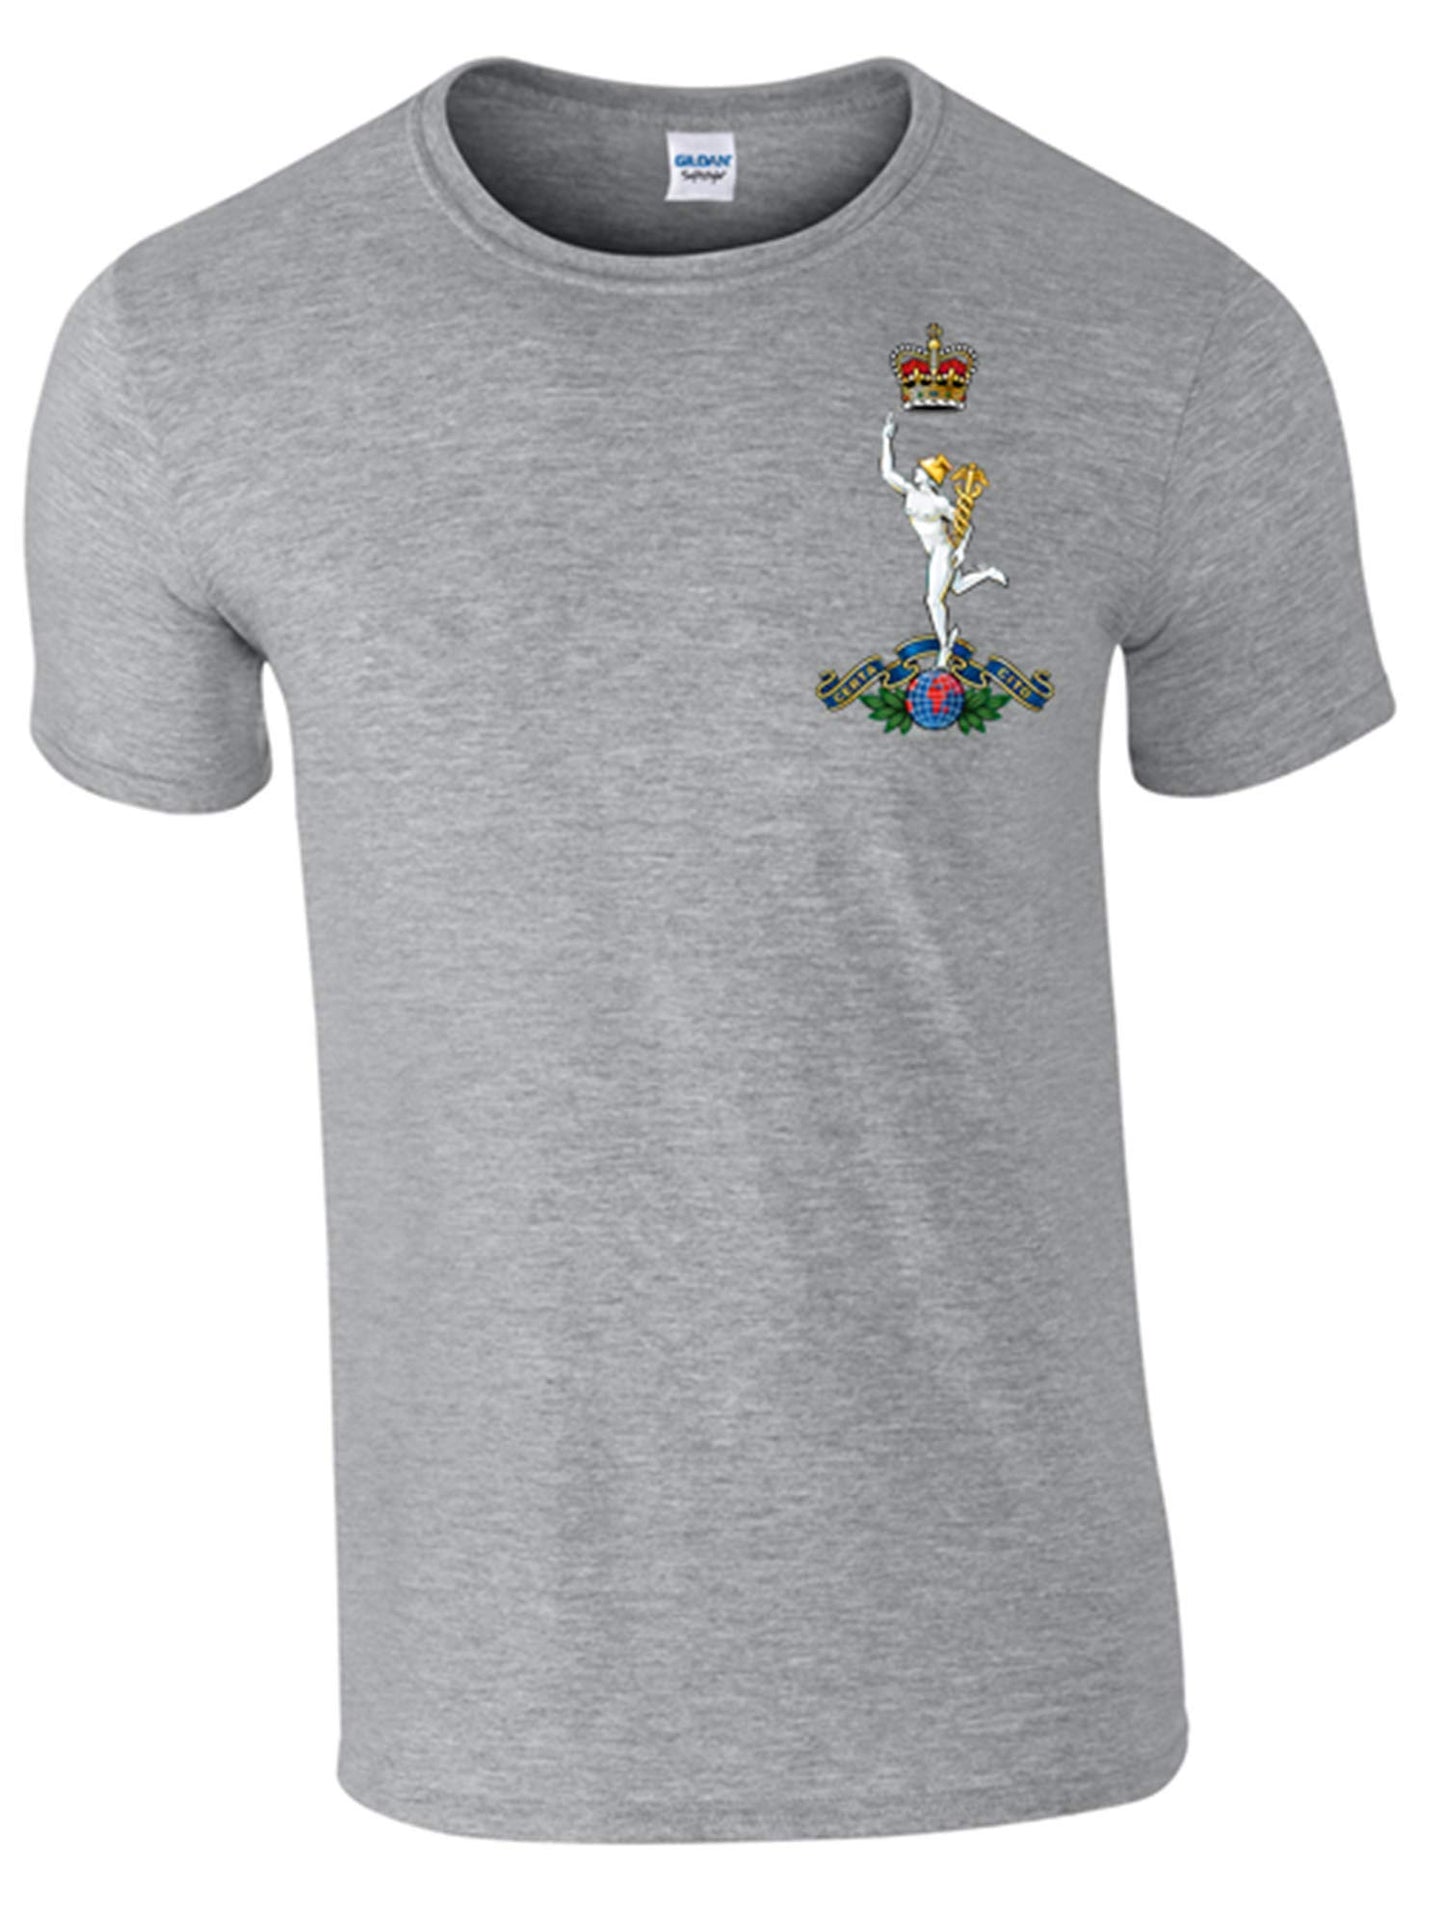 Royal Signals T-Shirt Official MOD Approved Merchandise - Army 1157 kit Grey / L Army 1157 Kit